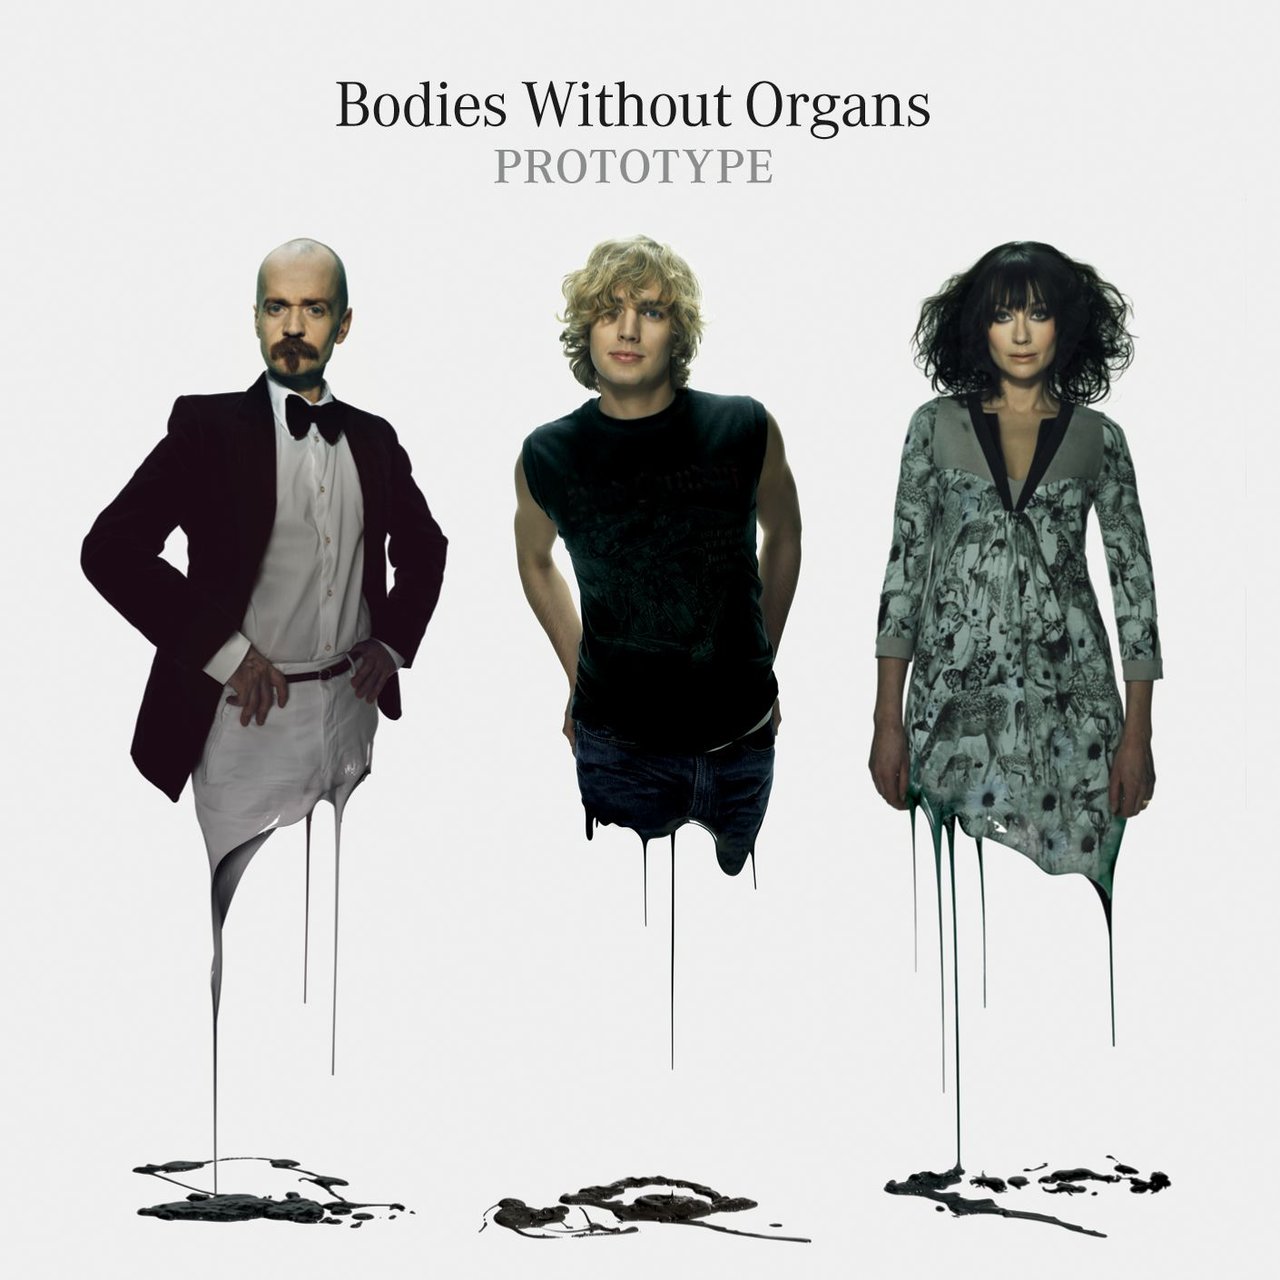 BWO (Bodies Without Organs) Prototype cover artwork